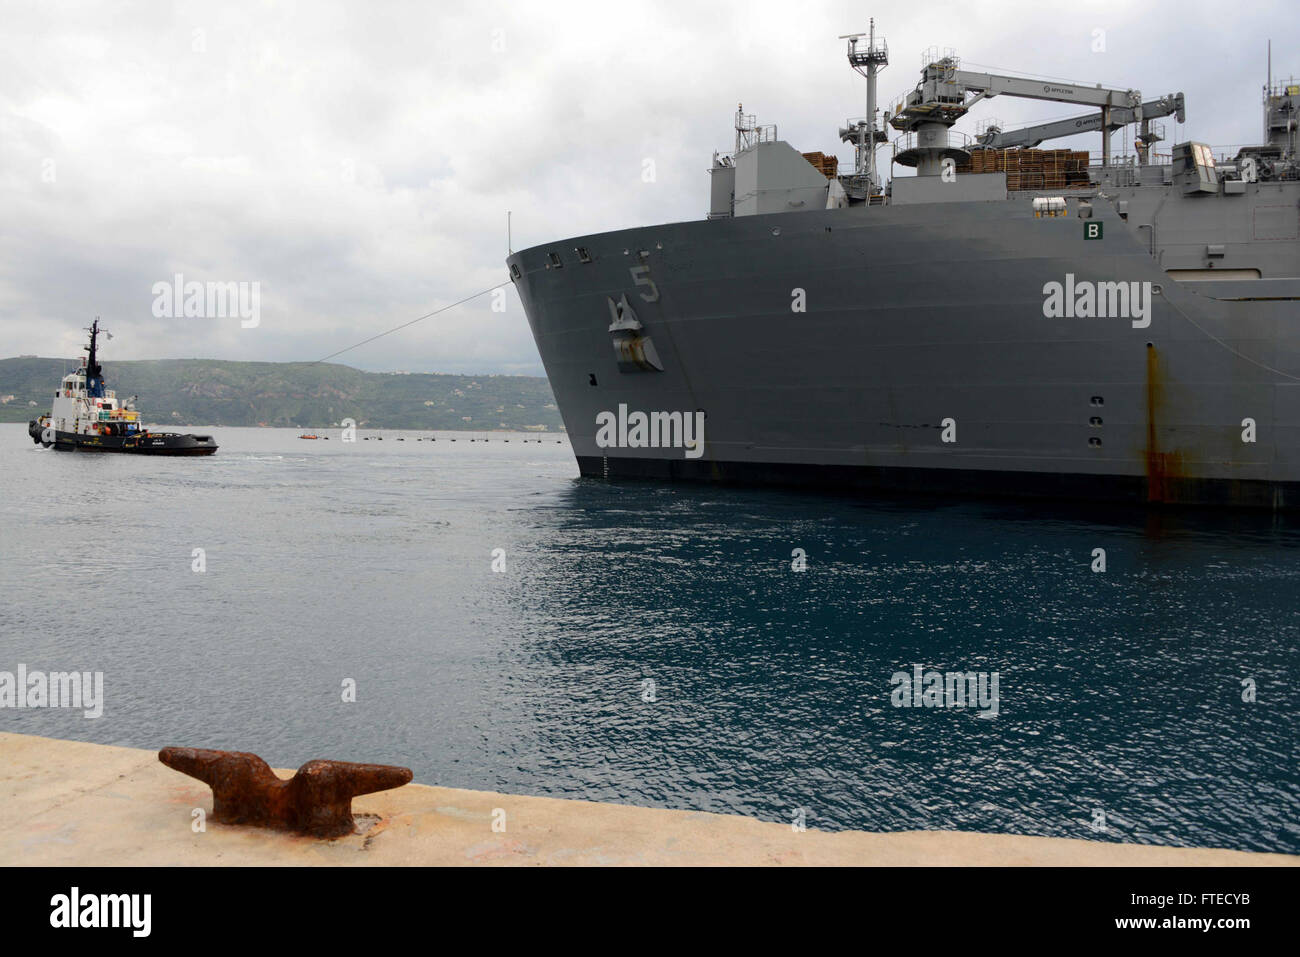 SOUDA BAY, Greece (Mar. 10, 2014) – The Military Sealift Command USNS Robert E. Peary (T-AKE-5) departs Souda Bay after a scheduled port visit. Peary, a Lewis and Clark-Class dry cargo ship able to transport over 6,000 tons of dry cargo and provide helicopter air support, is manned by a compliment of military and Civil Service Mariners. Stock Photo